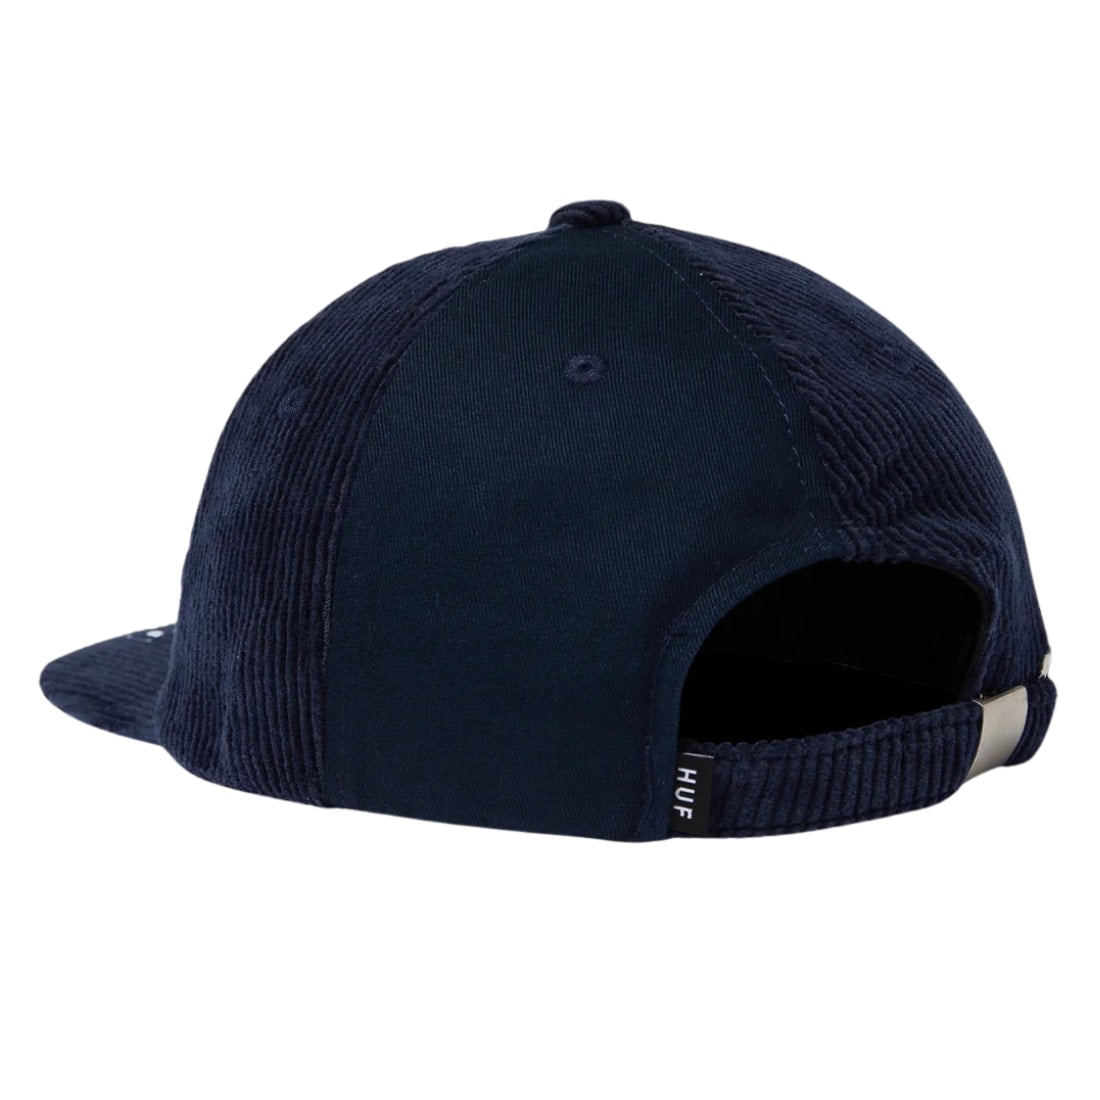 Huf Classic H Pin Wheel 6 Panel Strapback Hat - Navy - Snapback Cap by Huf One Size